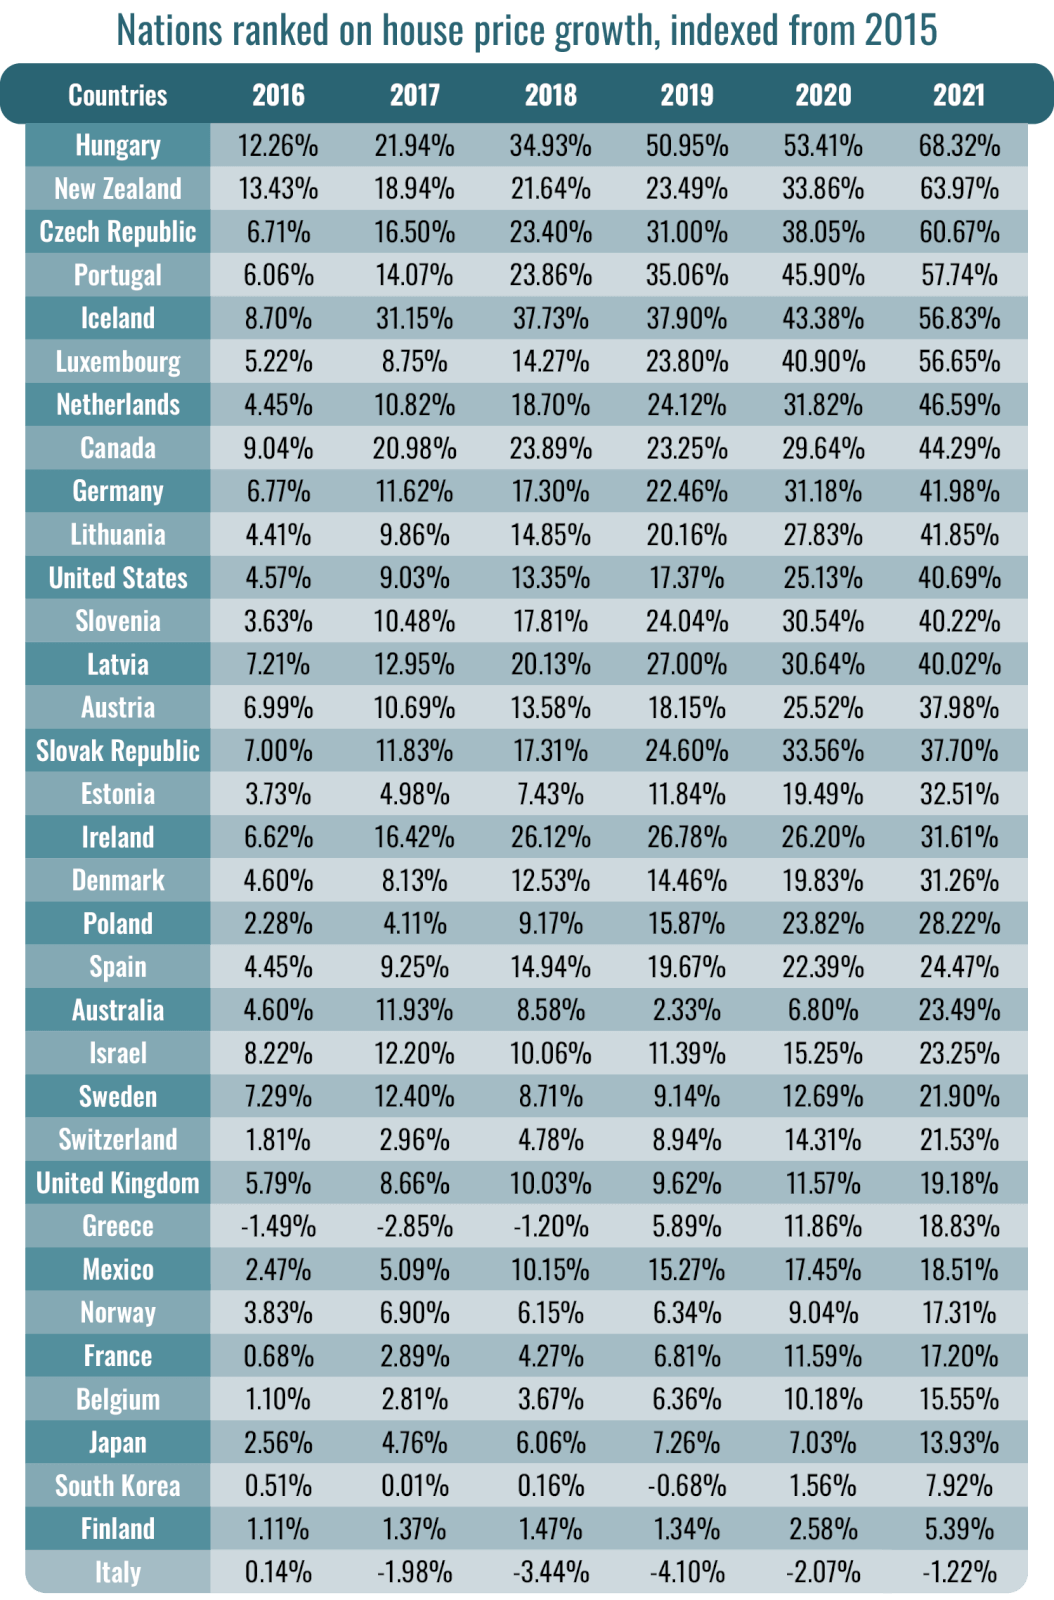 Table rankings of countries with the biggest house price growth